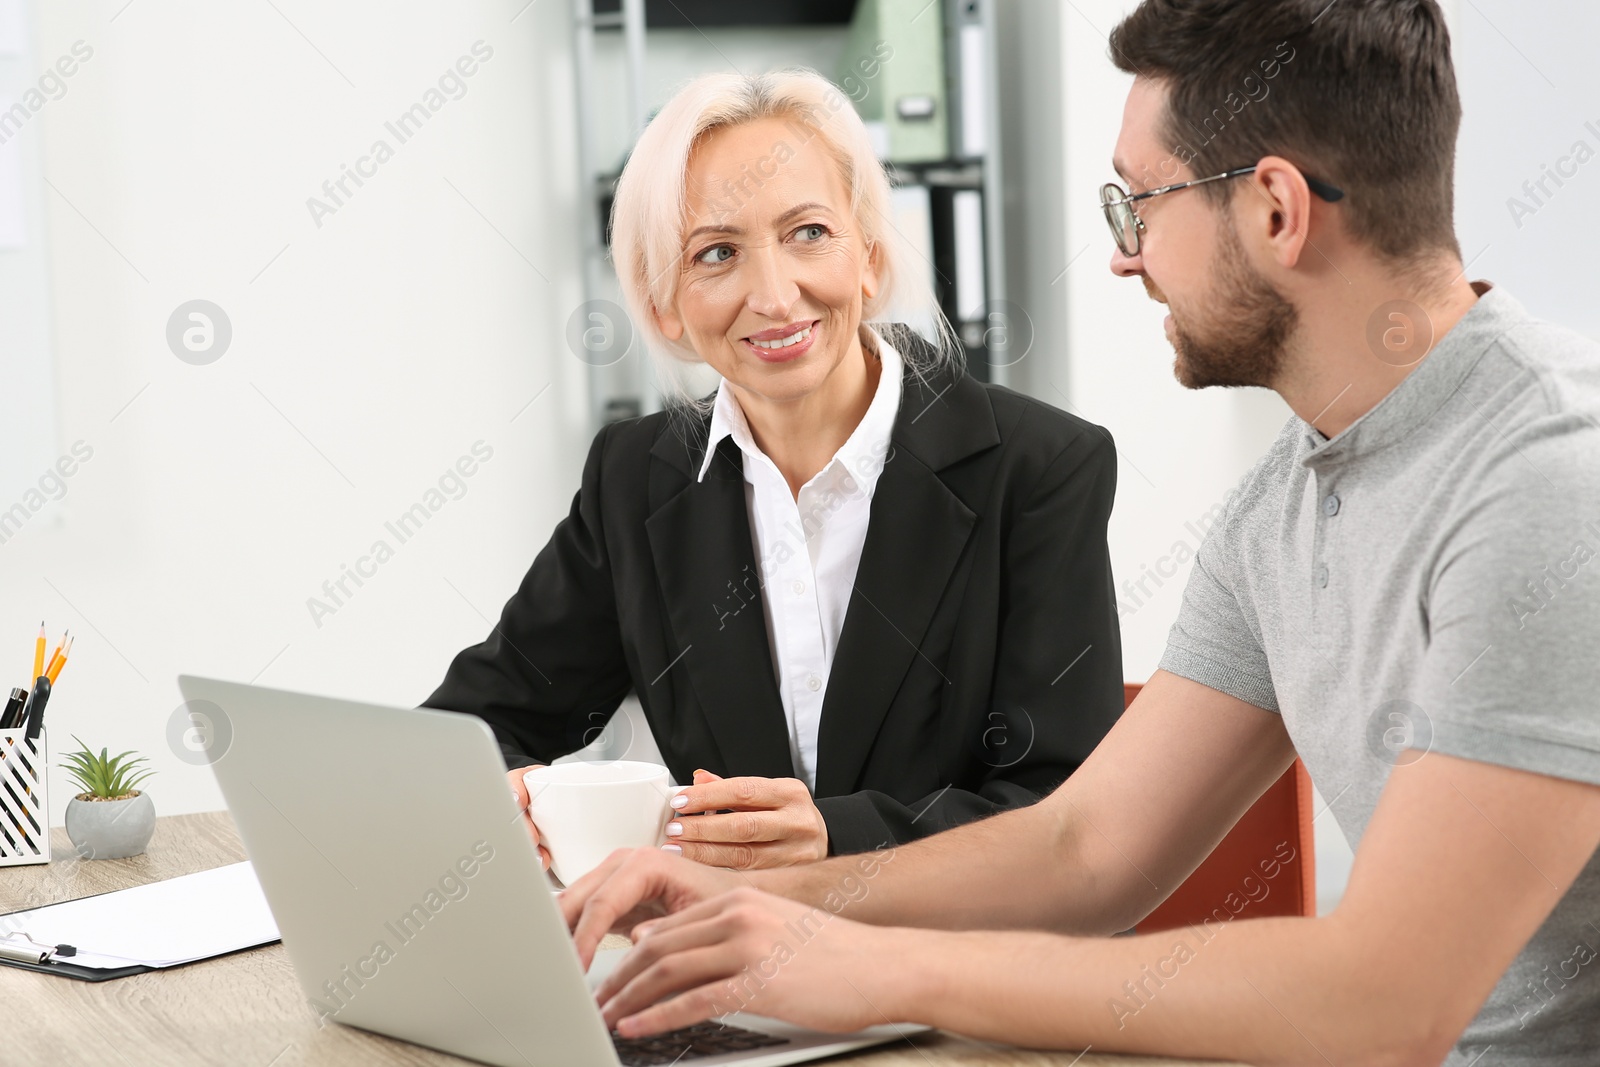 Photo of Happy boss with cup of drink and employee discussing work issues at wooden table in office